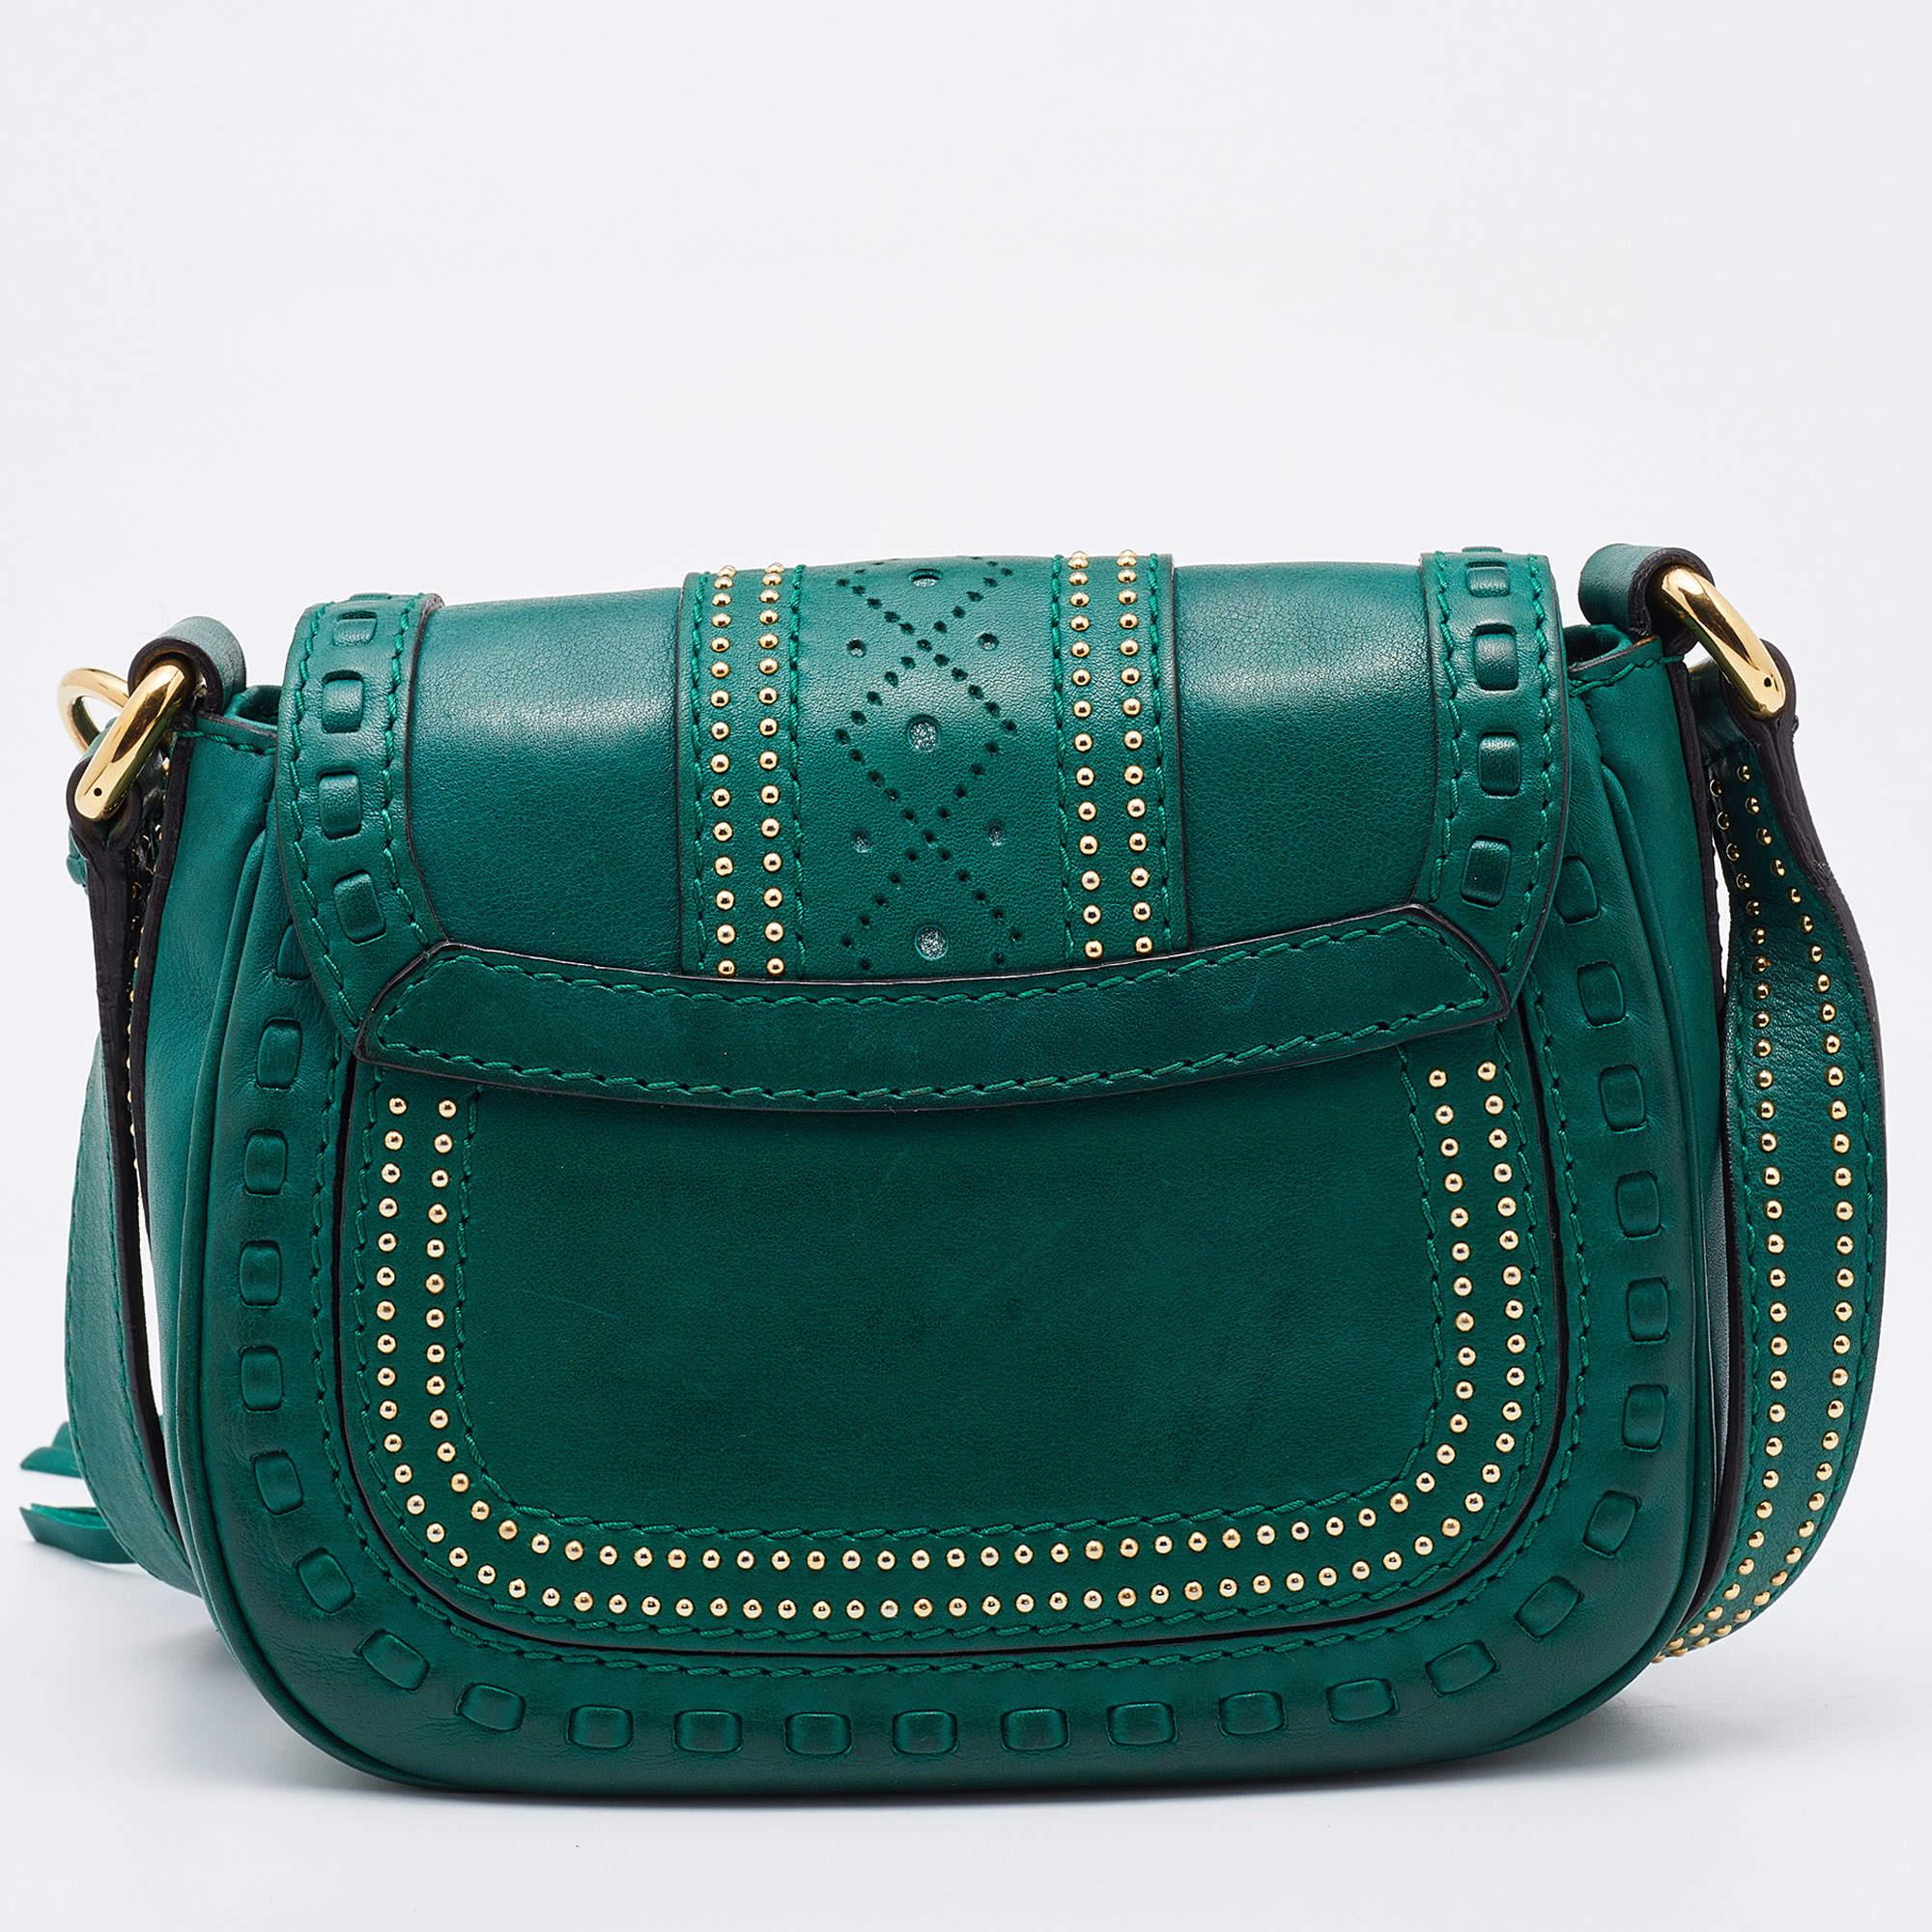 Gucci Green Leather Small Snaffle Bit Shoulder Bag 4